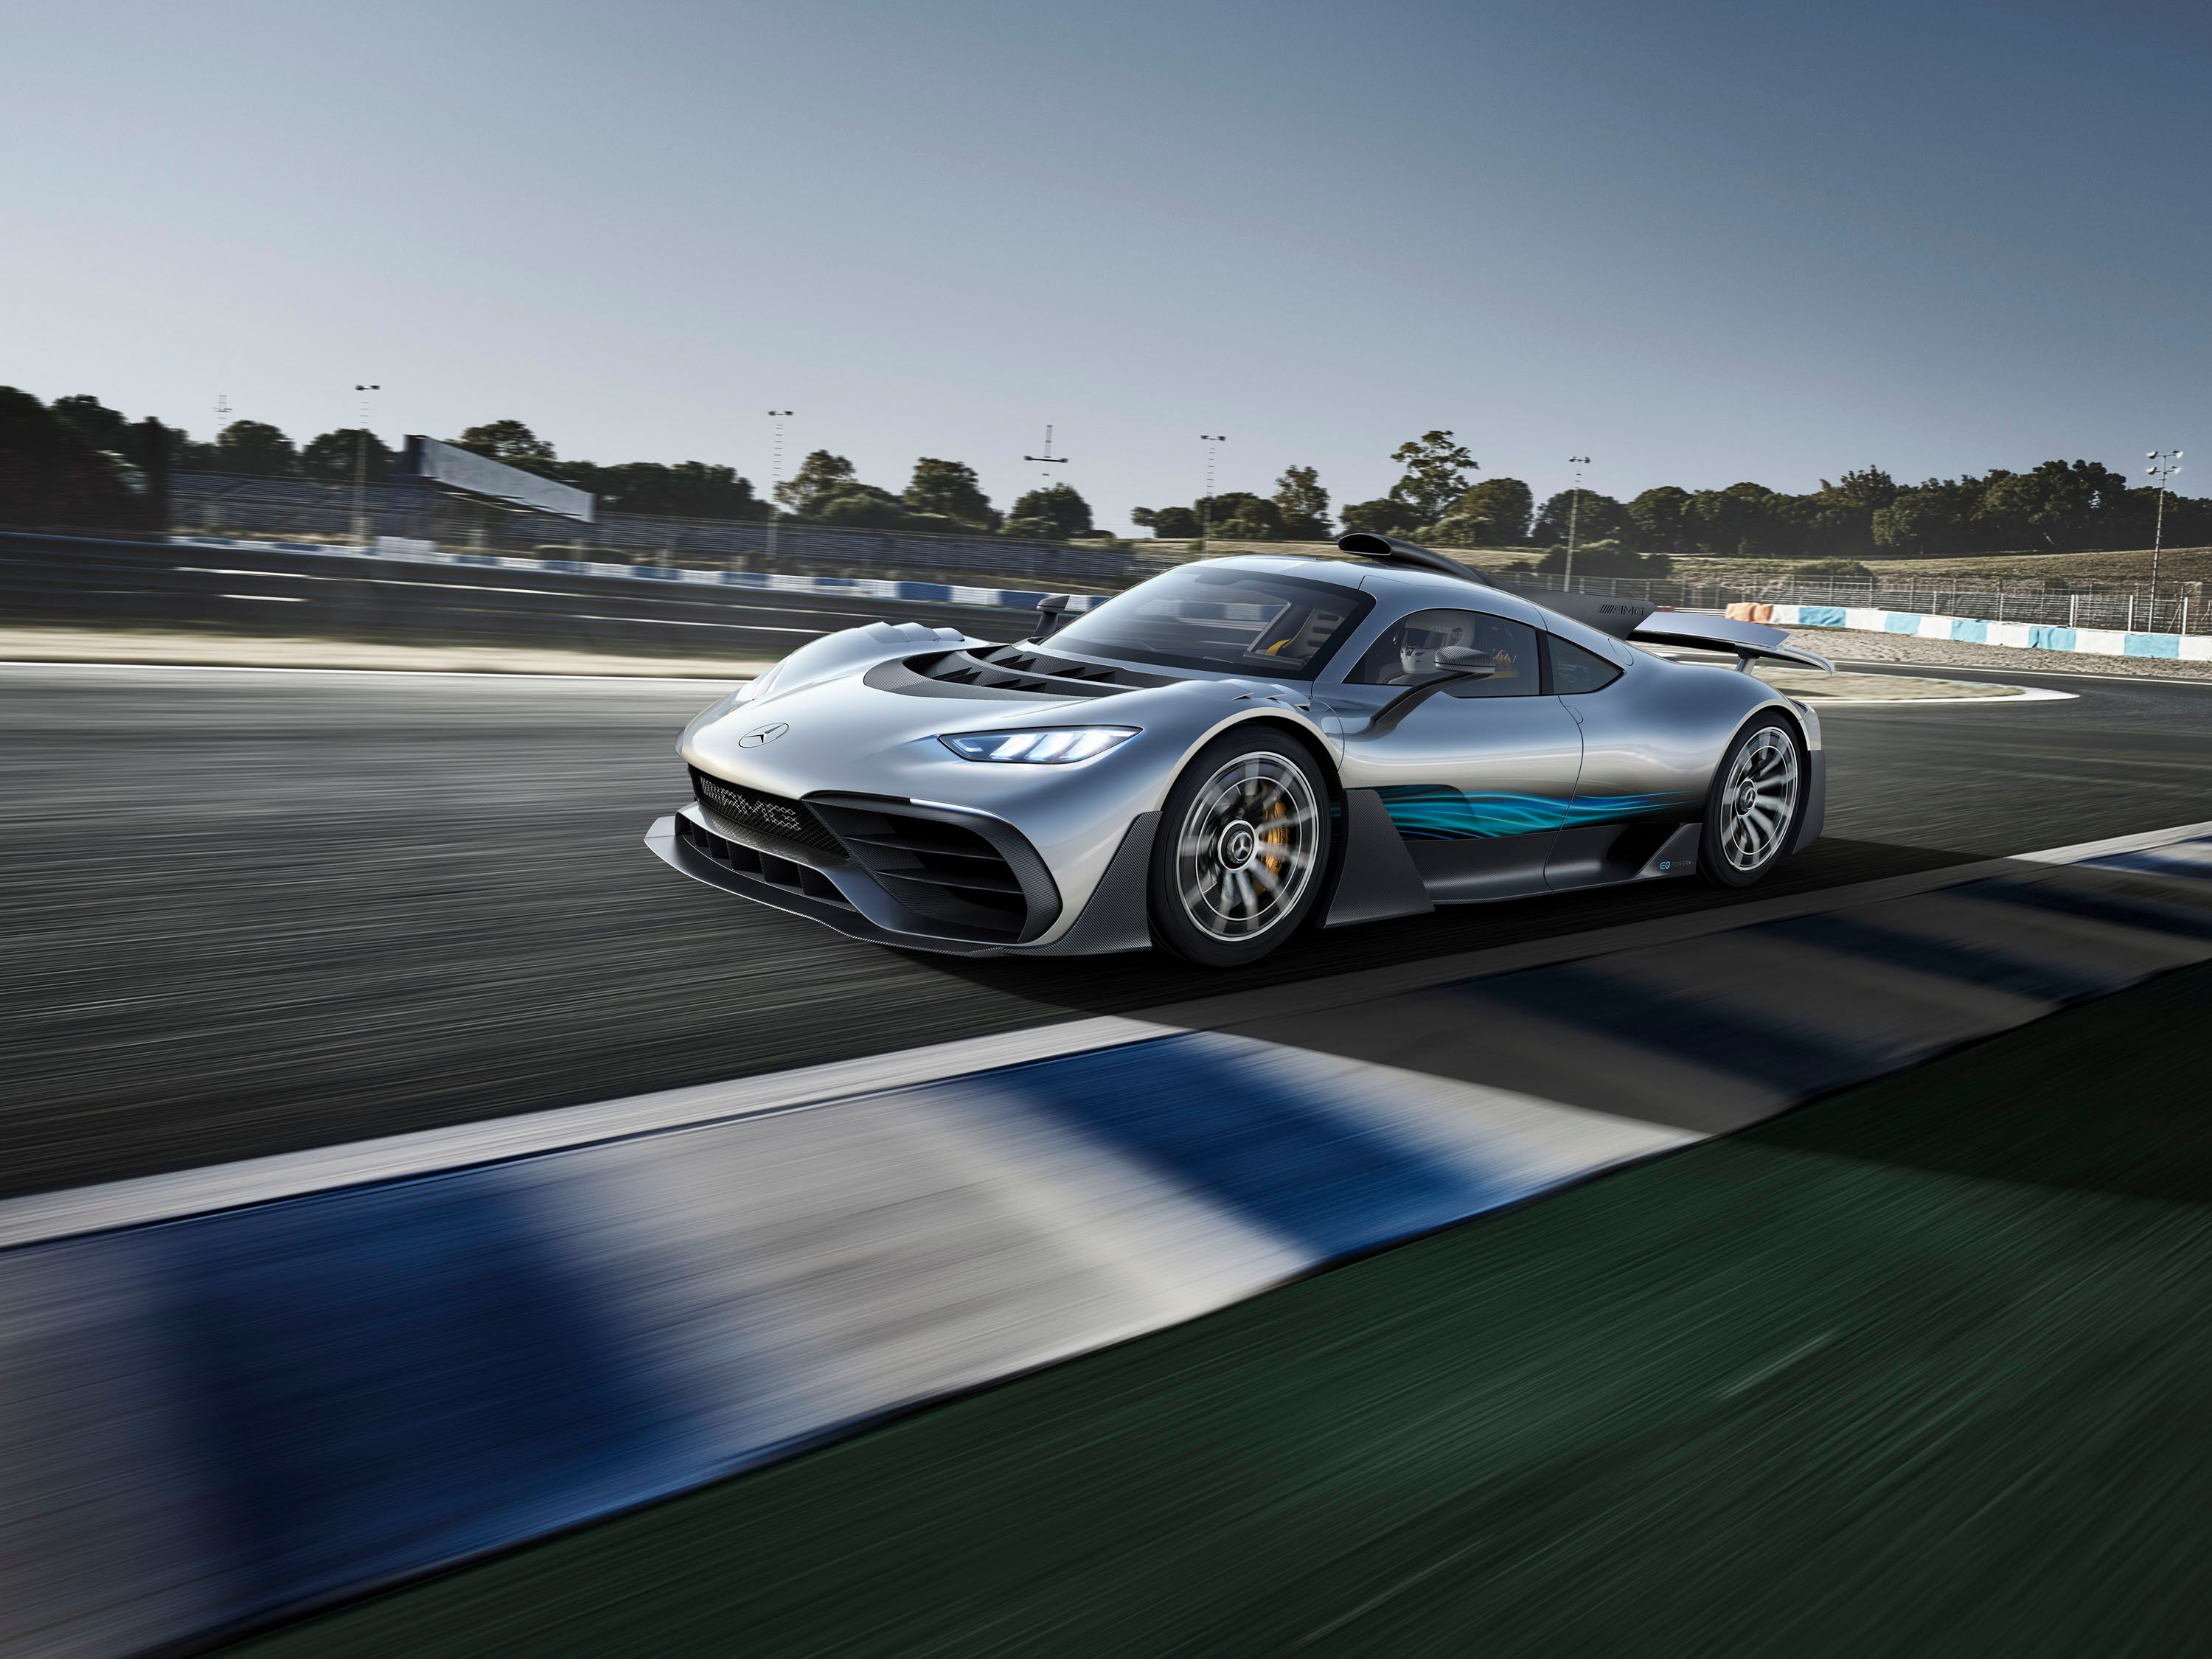 2020 Mercedes-AMG Project One